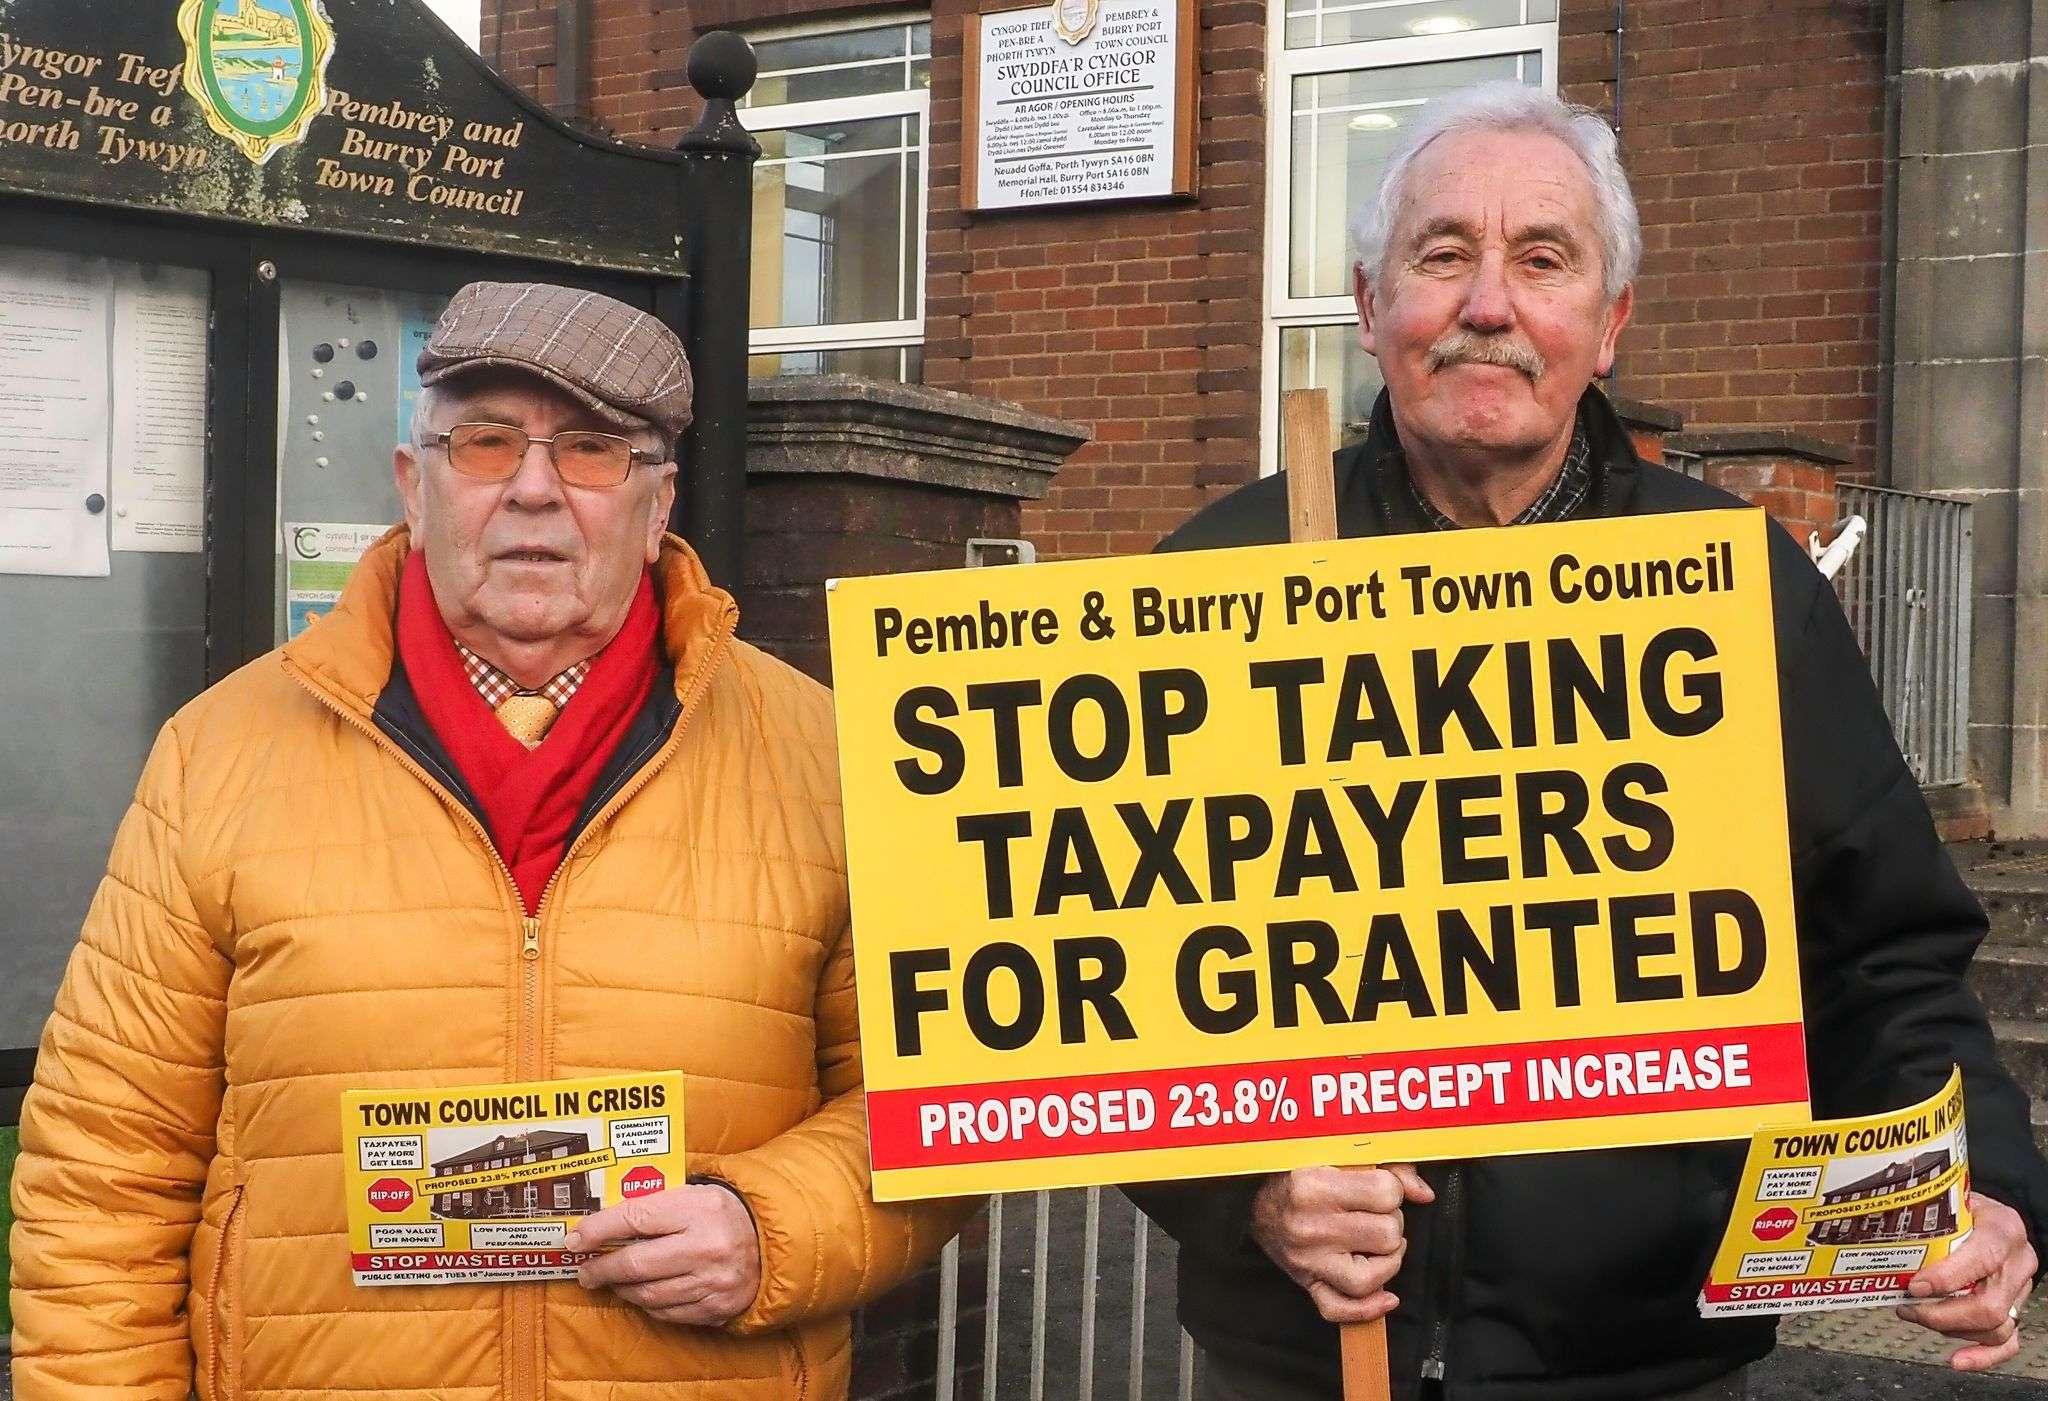 Anger at Town Council’s proposed 23.8% rise in precept